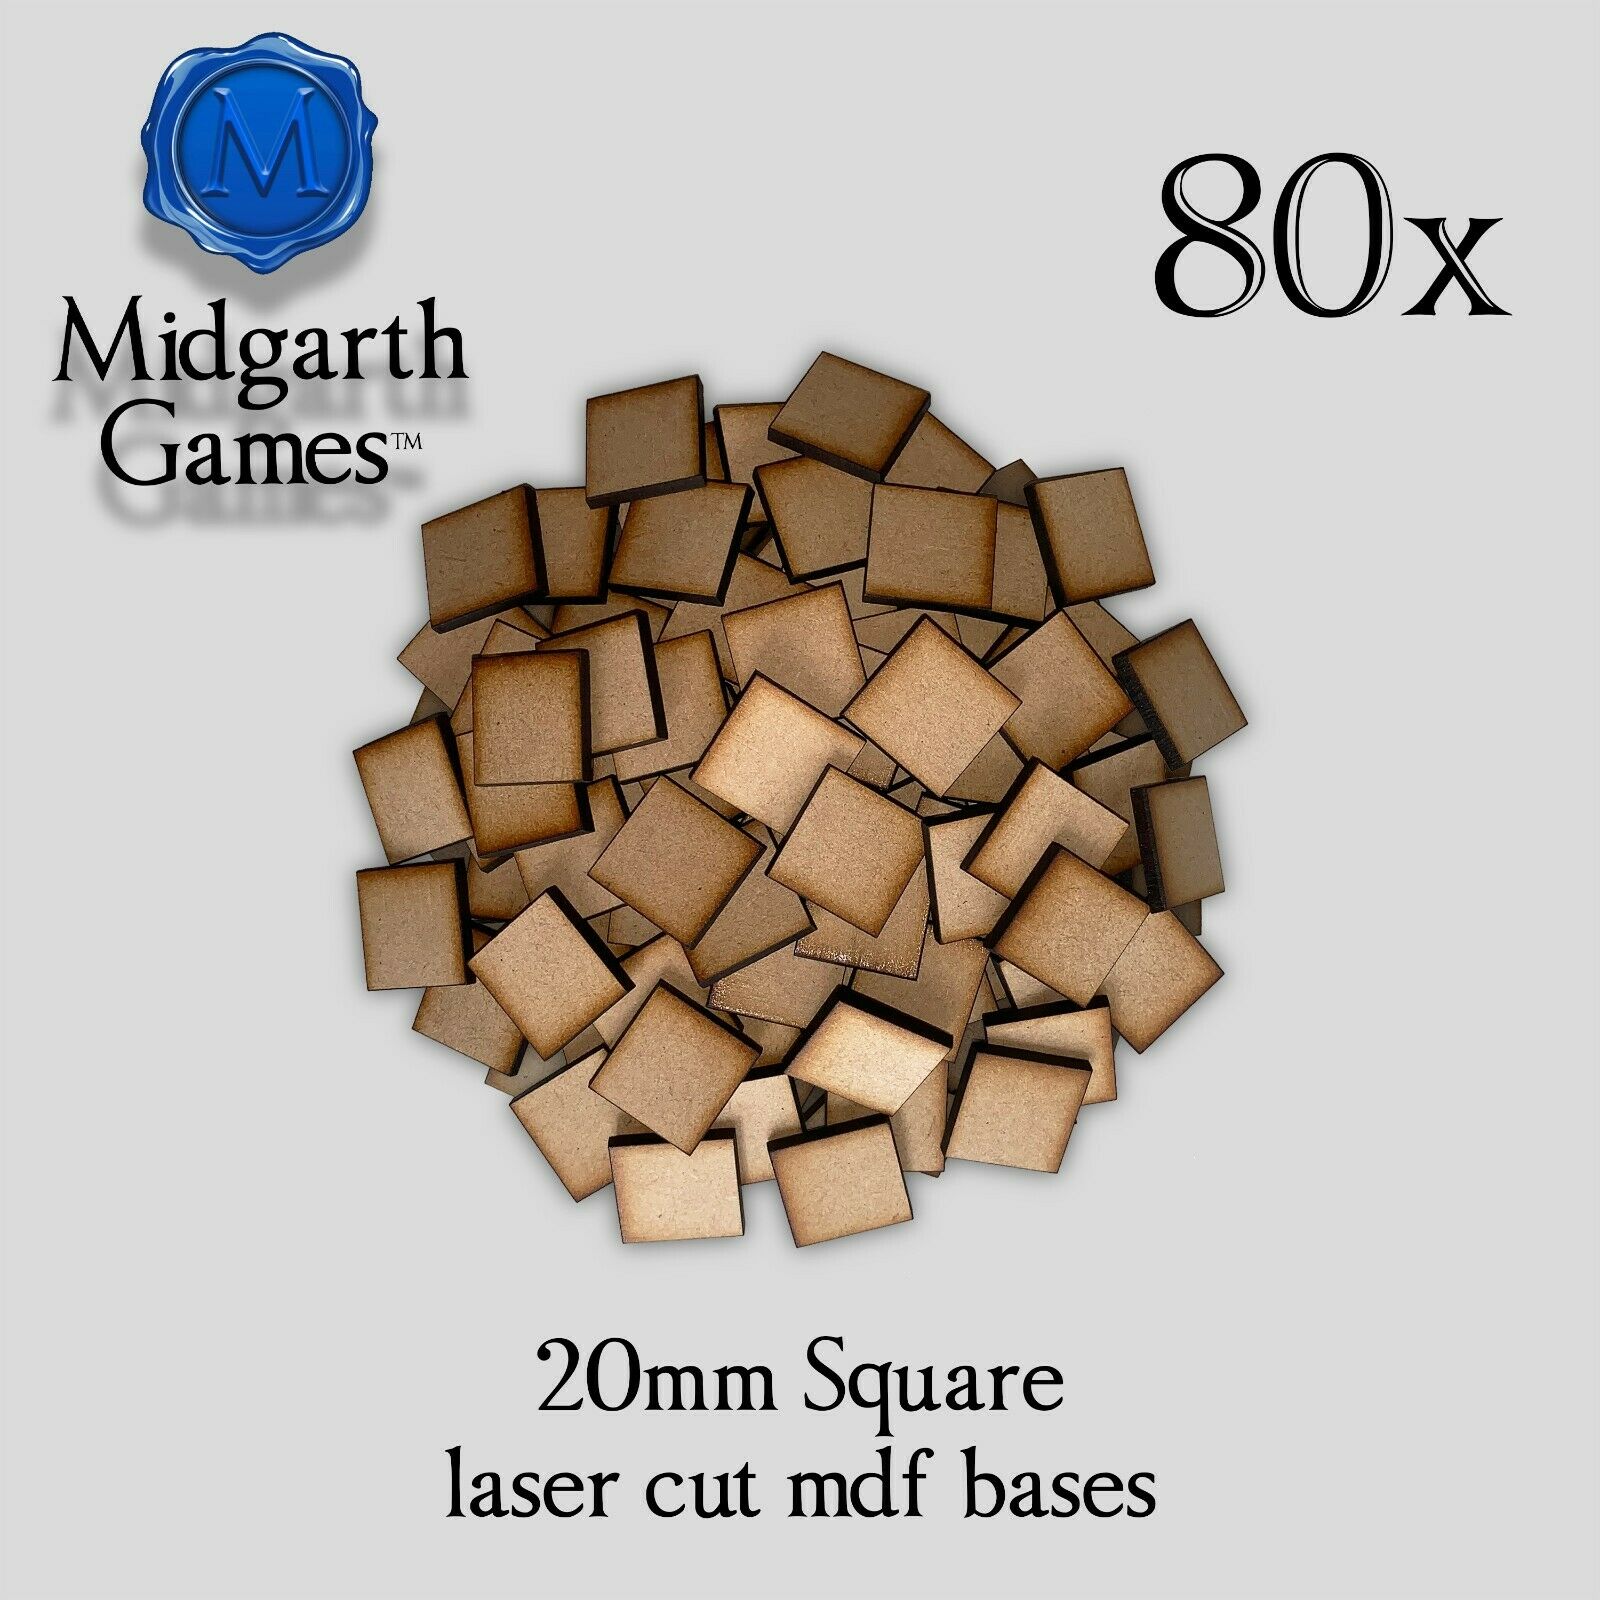 80x Square 20mm Mdf Bases Miniature Warhammer Laser Cut 40k Fast Shipping